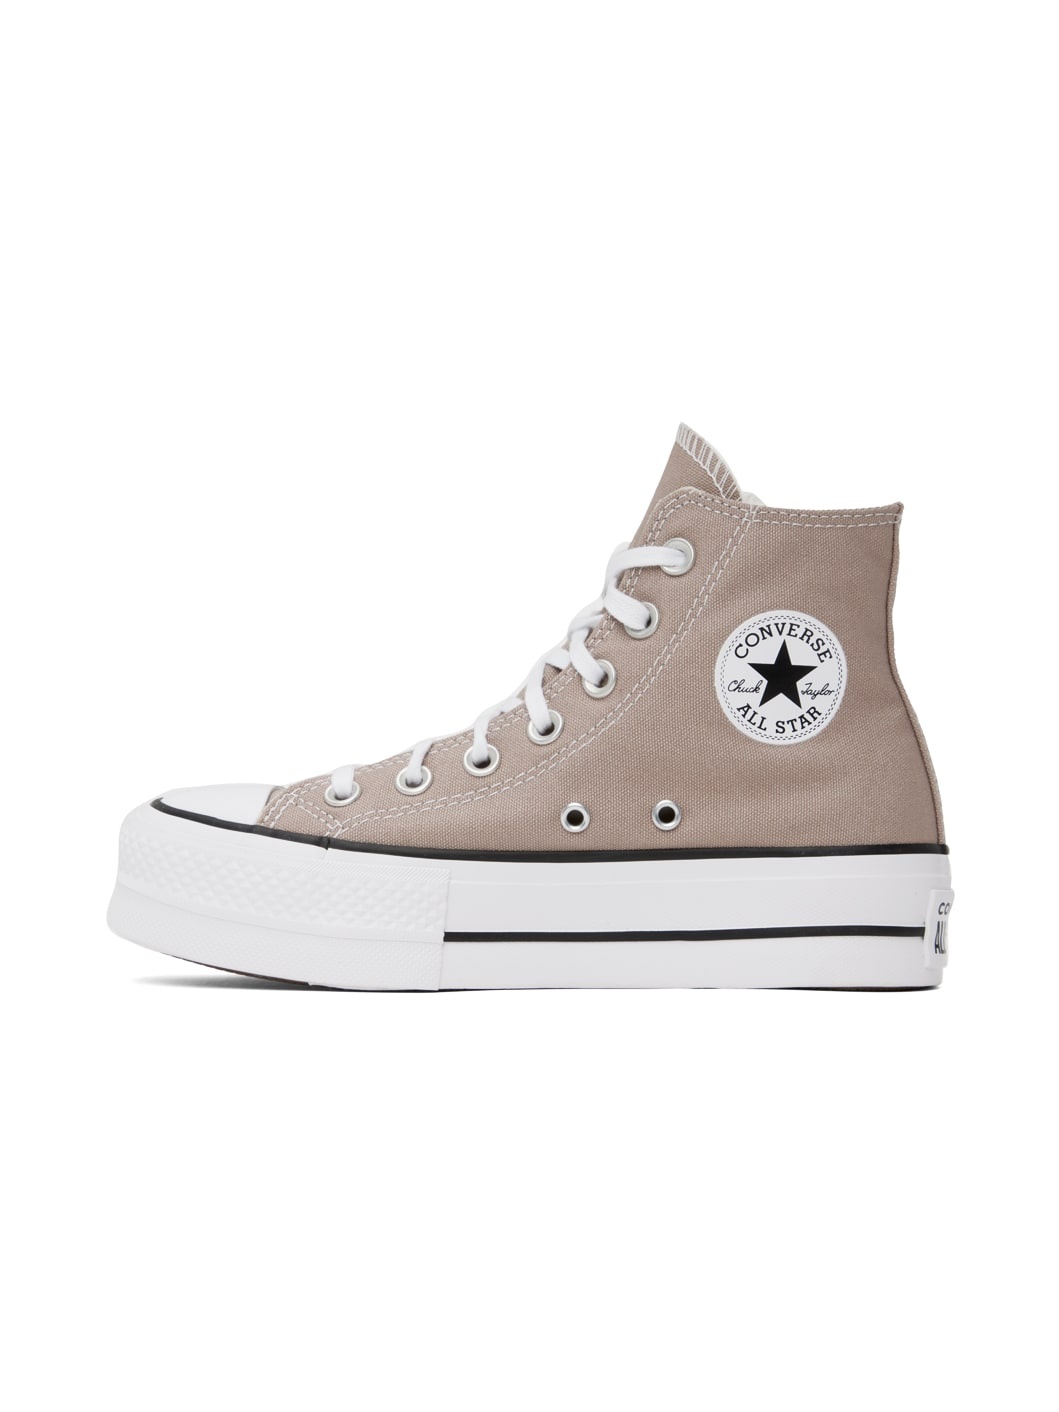 Taupe Chuck Taylor All Star Lift Platform High Top Sneakers - 3